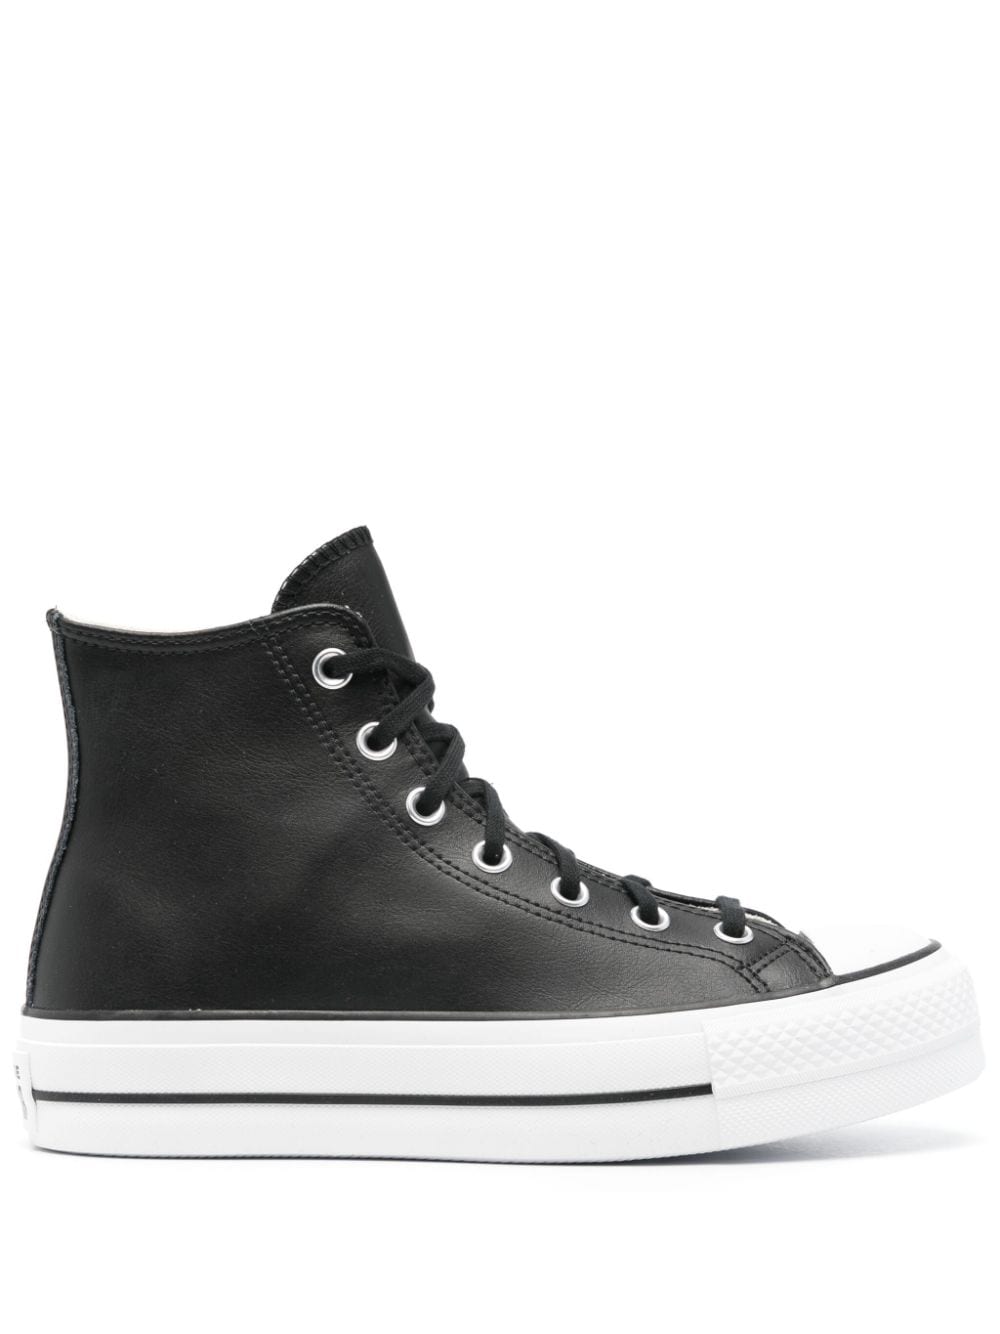 Converse Chuck Taylor Leather Platform Sneakers In Black